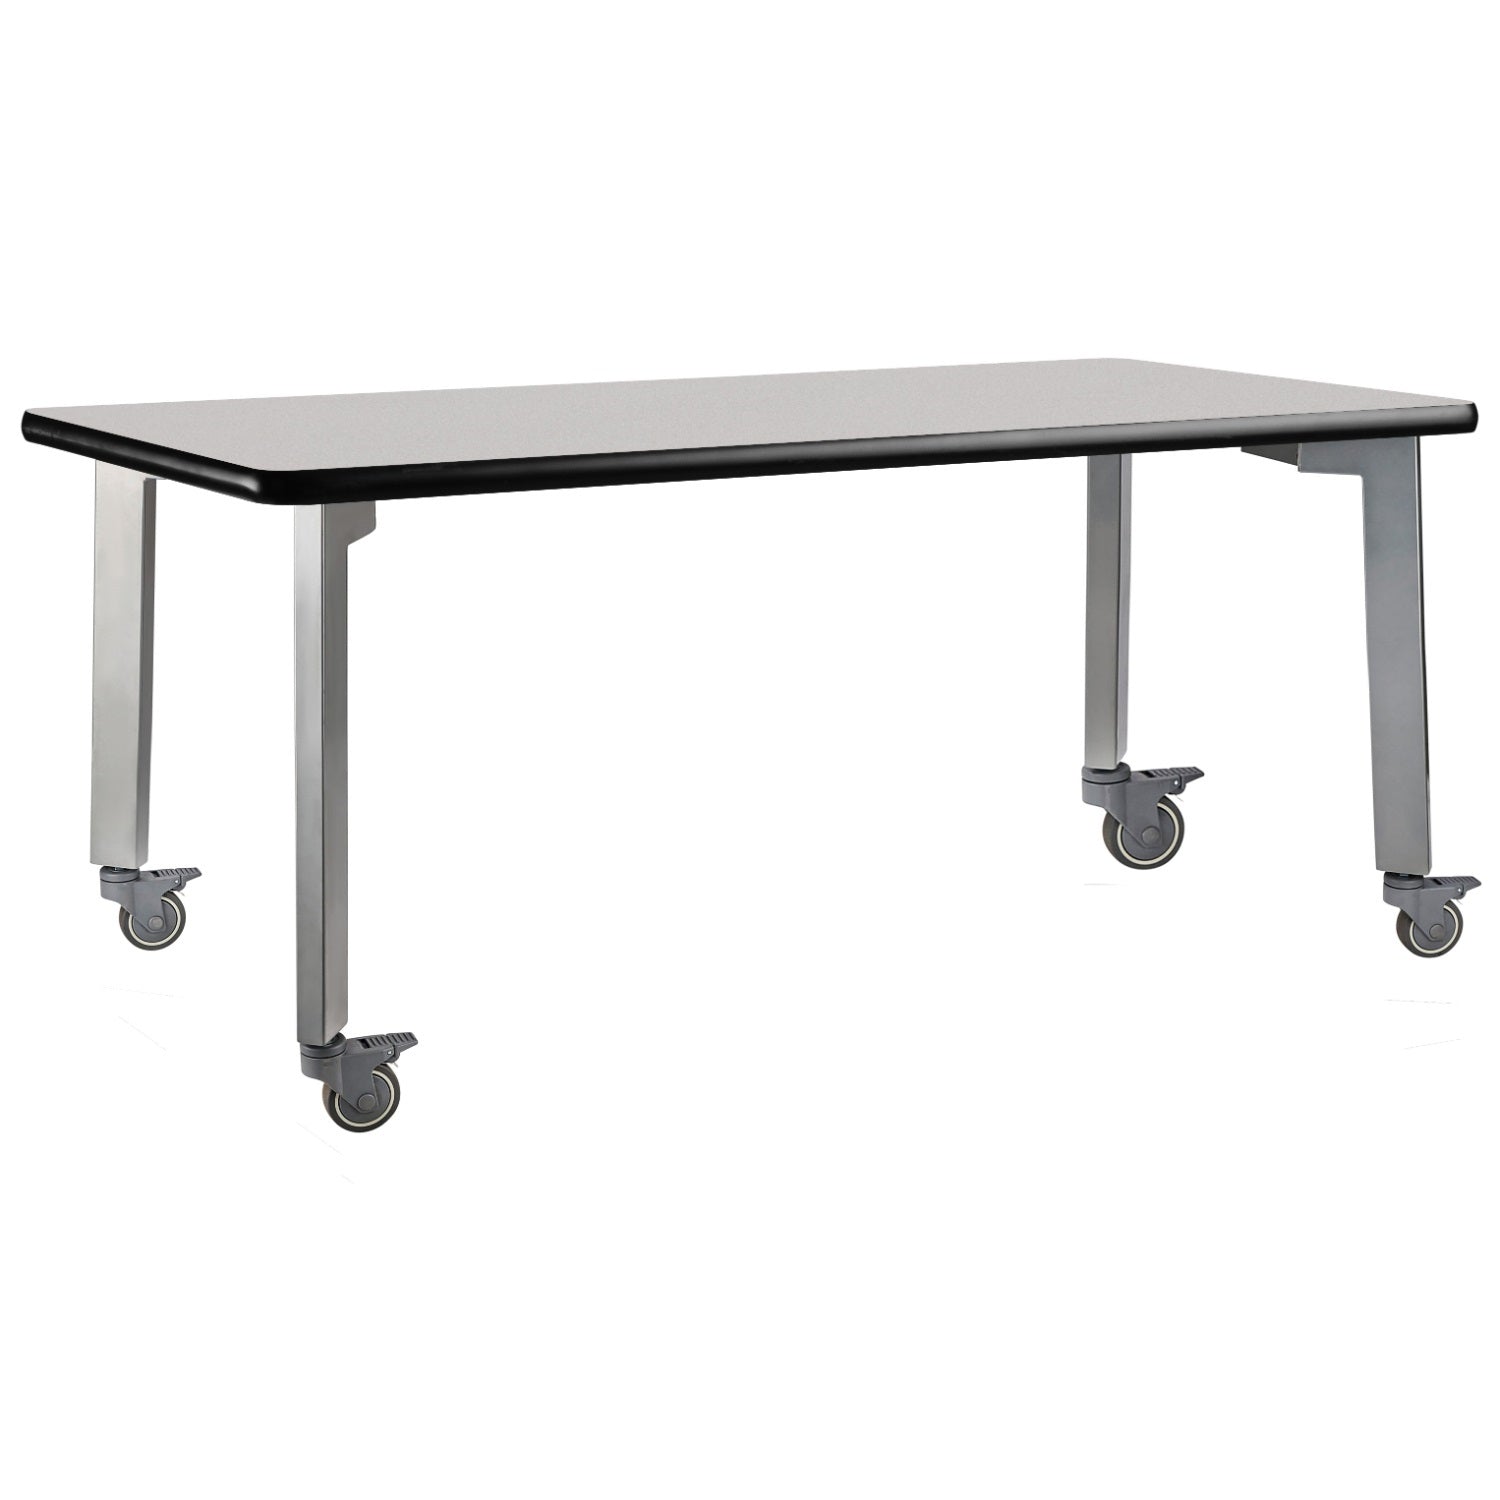 Titan Mobile Table, 36" x 60", Supreme High Pressure Laminate Top with MDF Core and ProtectEdge